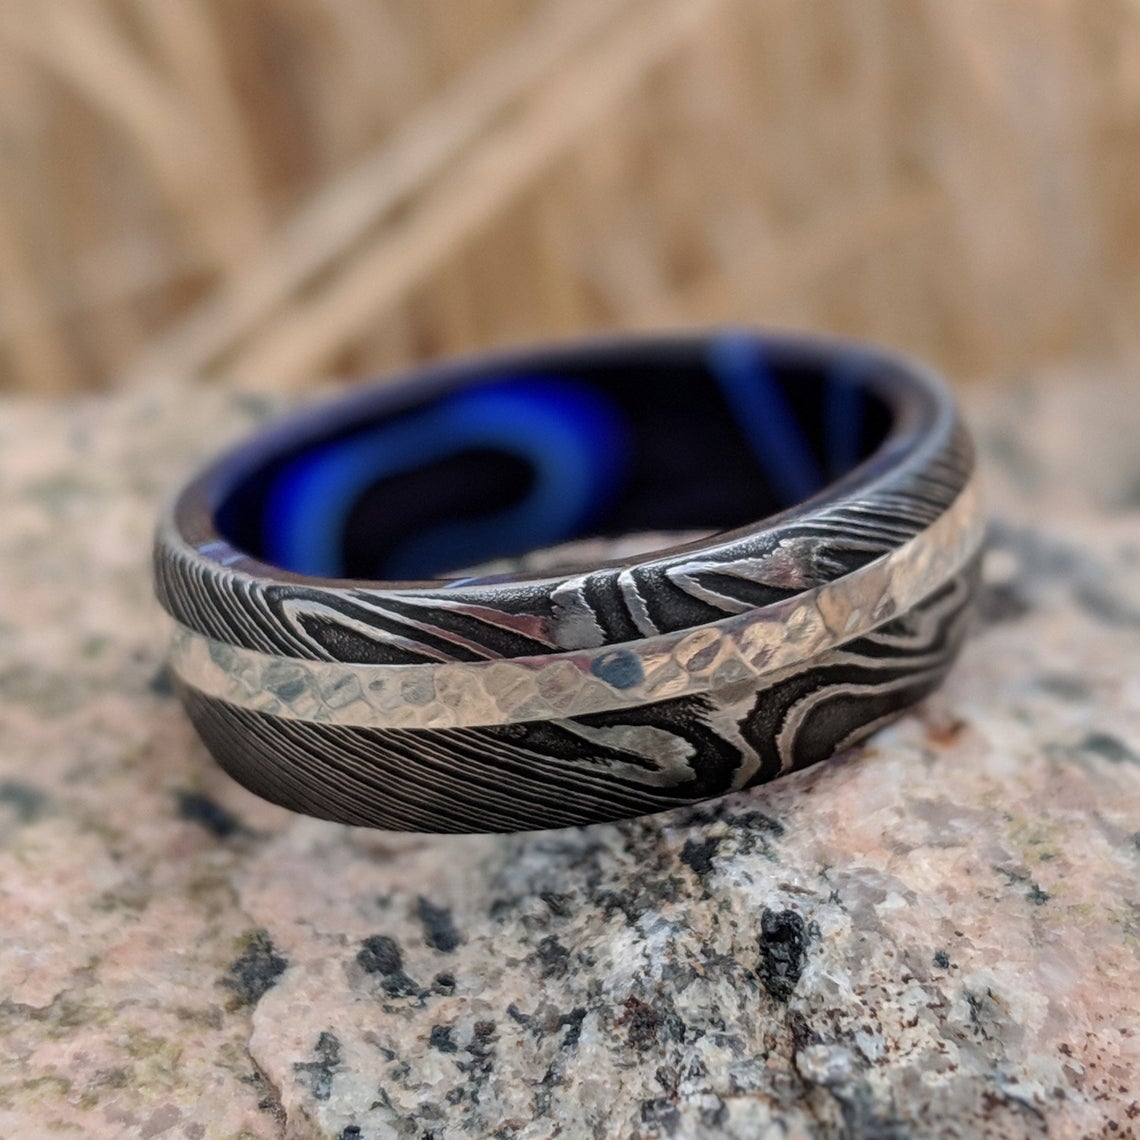 8mm wide black Damascus steel wedding band with a 2mm wide white gold inlay with a dark blue acrylic sleeve